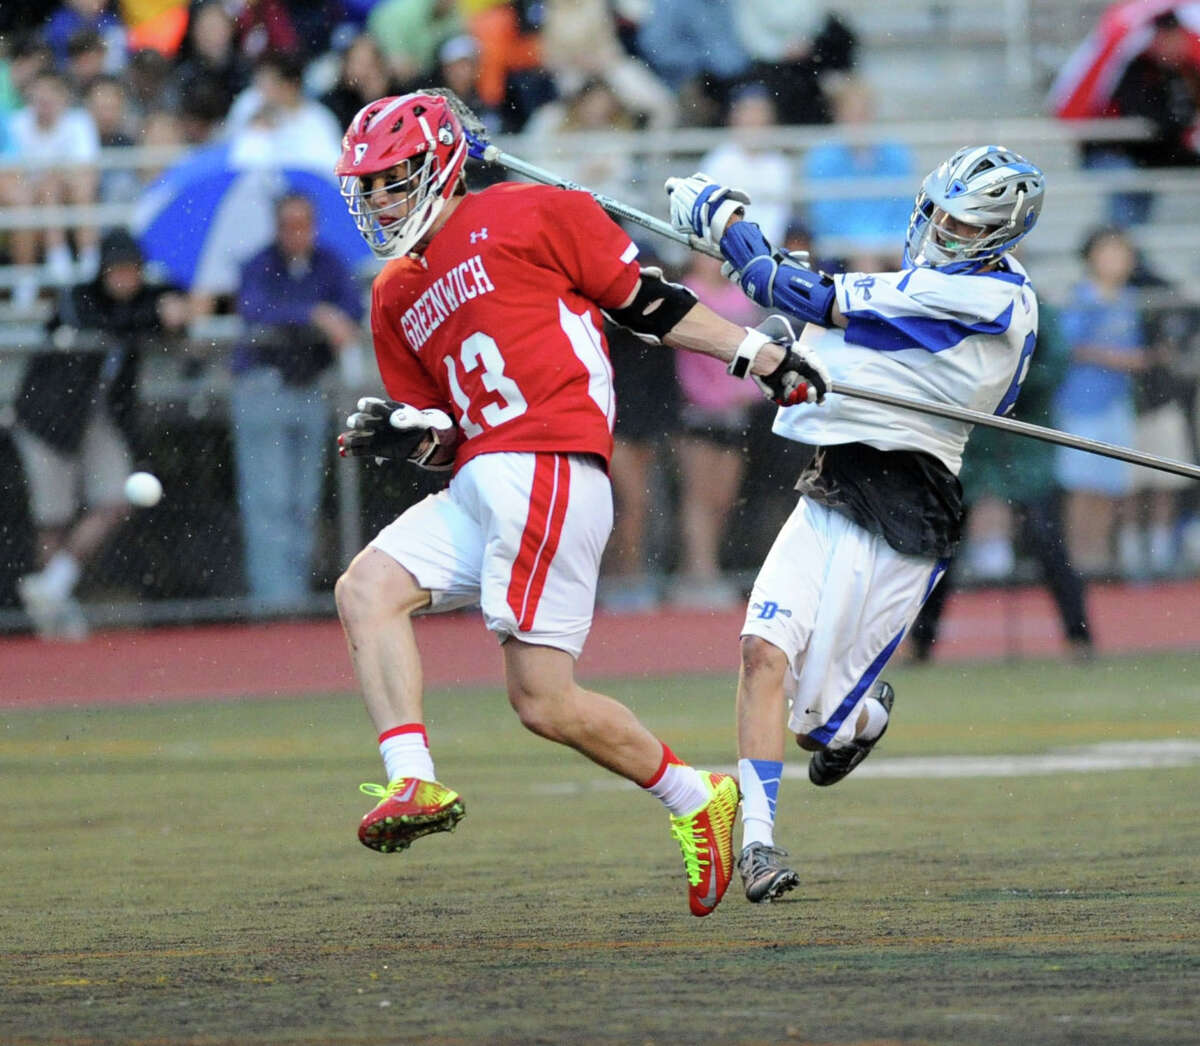 At right, Peter Lindley of Darien scores as Jack Nail of Greenwich defends during the FCIAC boys championship lacrosse match between Greenwich High School and Darien High School at Brien McMahon High School in Norwalk, Friday night, May 30, 2014. Darien won the championship defeating Greenwich, 11-6.